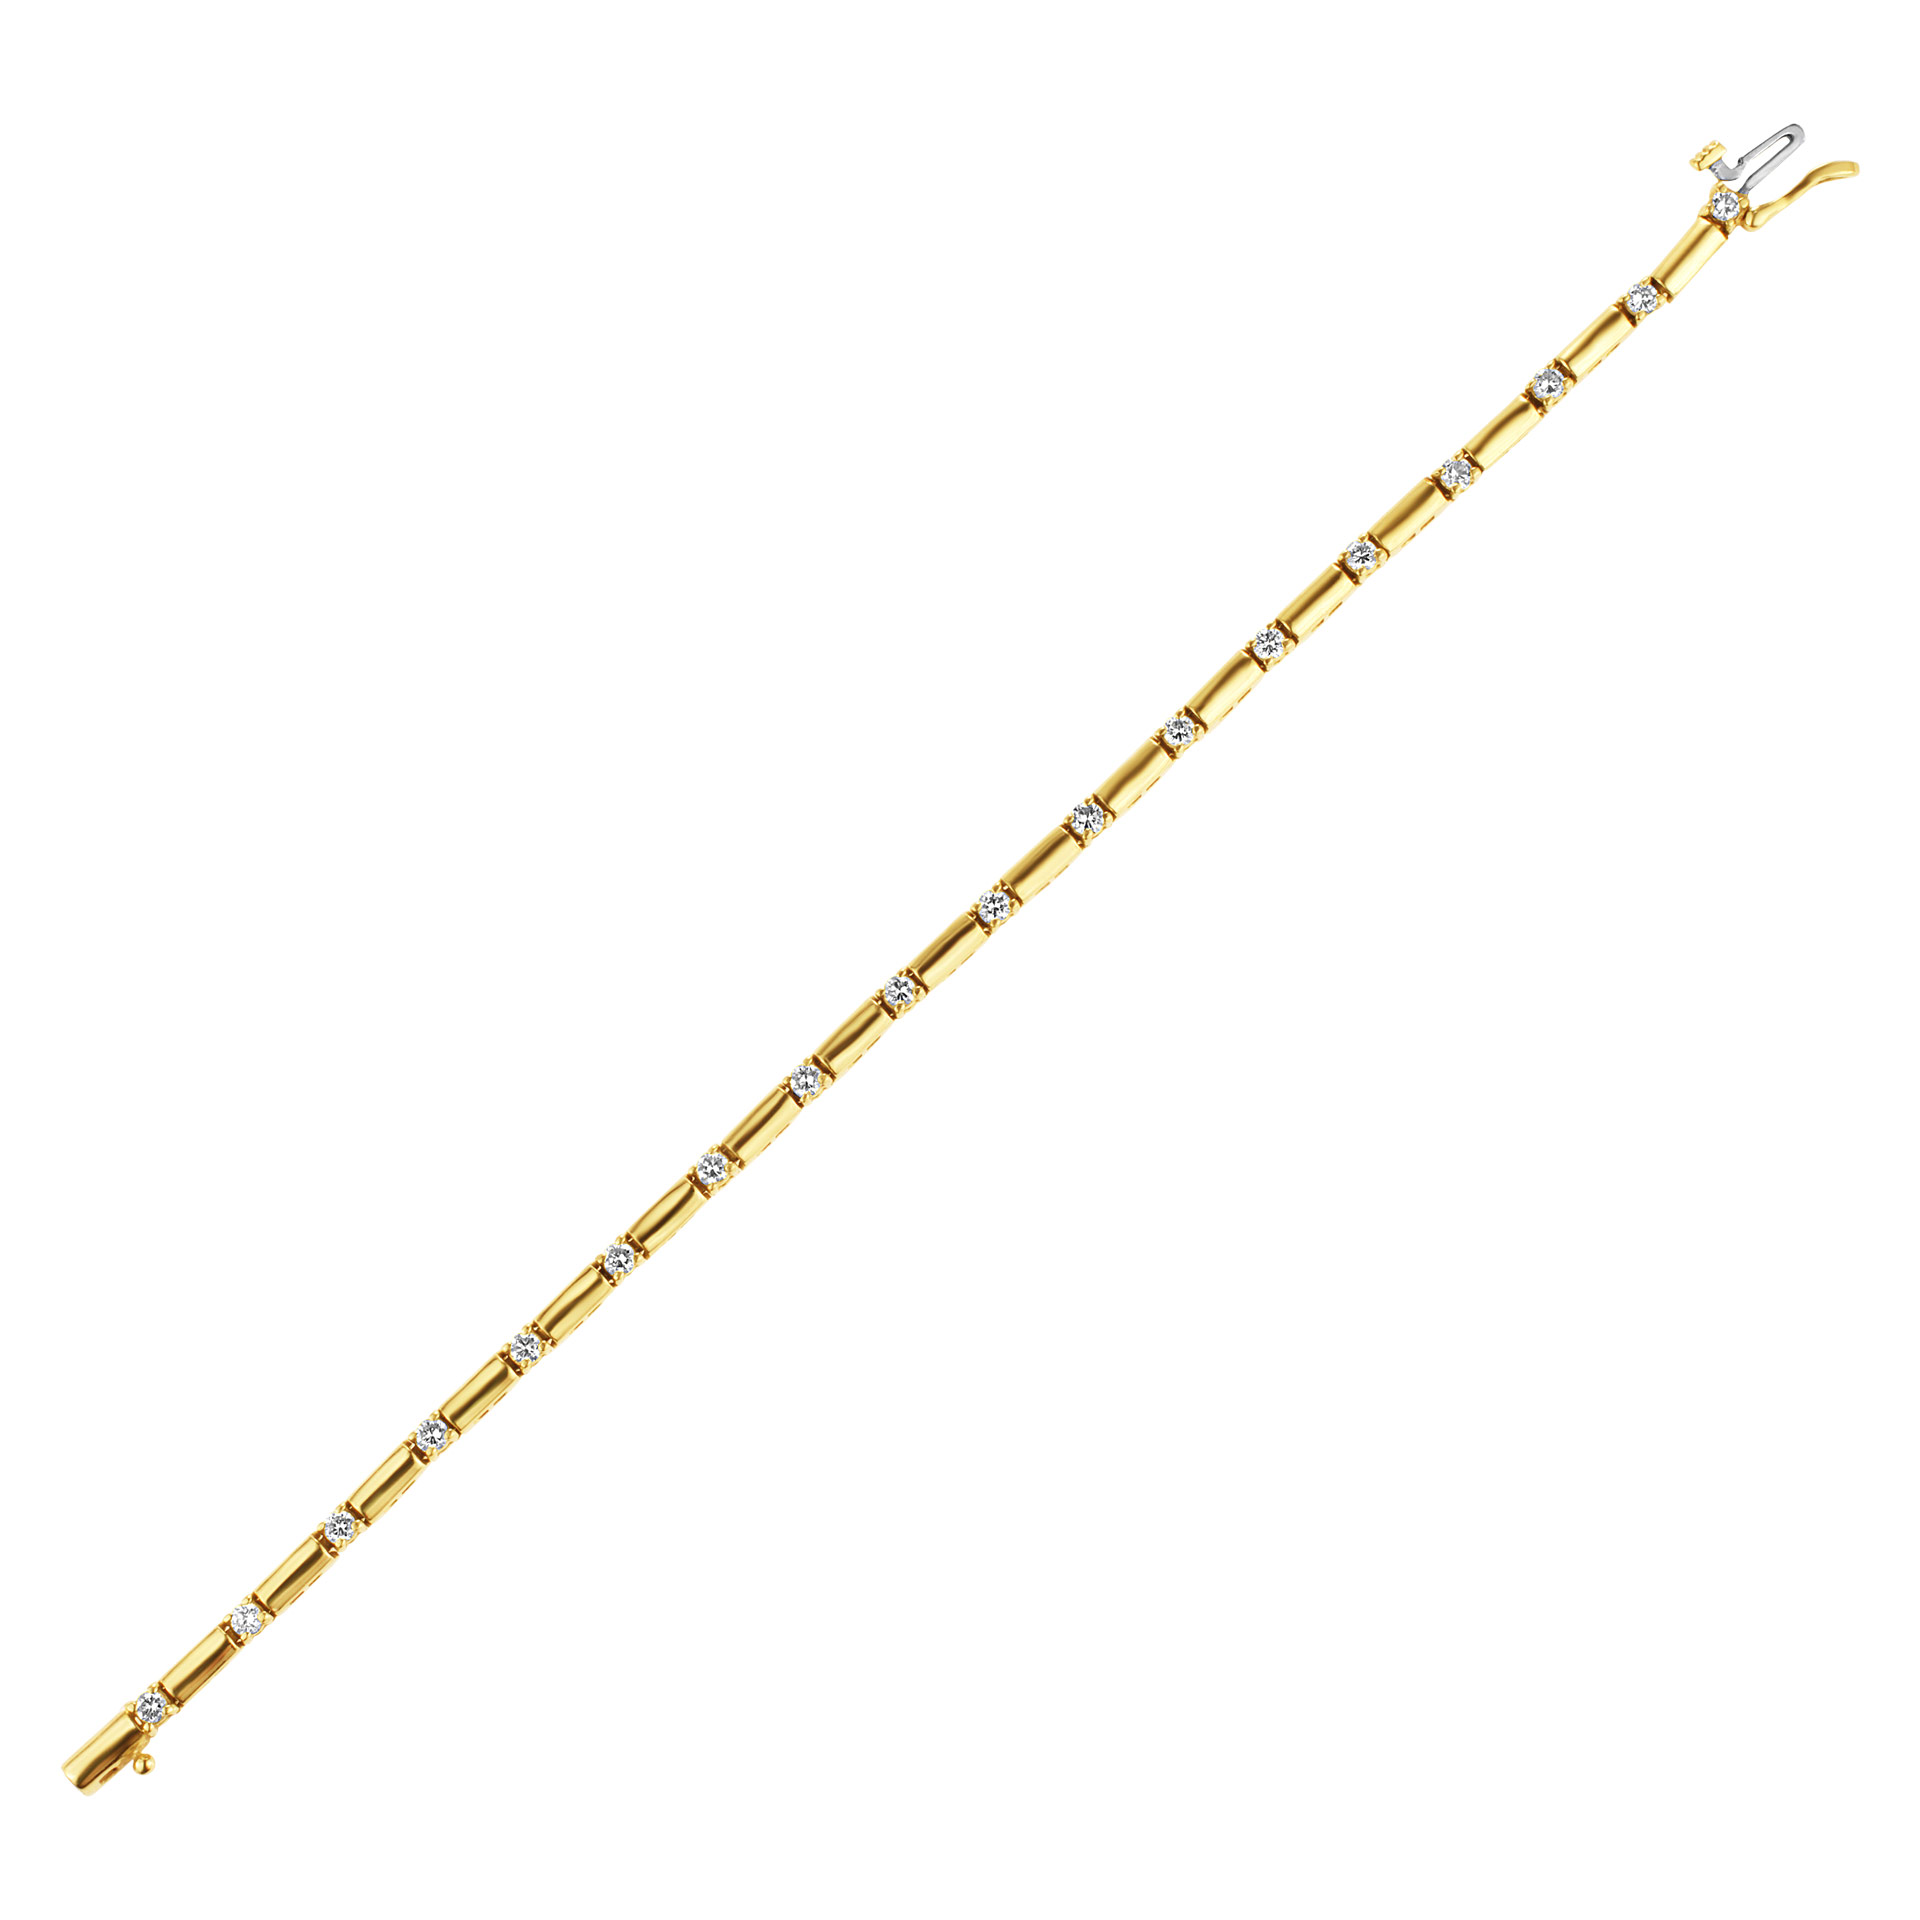 Line Bracelet In 14k Yellow Gold With Diamond Stations. 1.00 cts in diamonds image 1